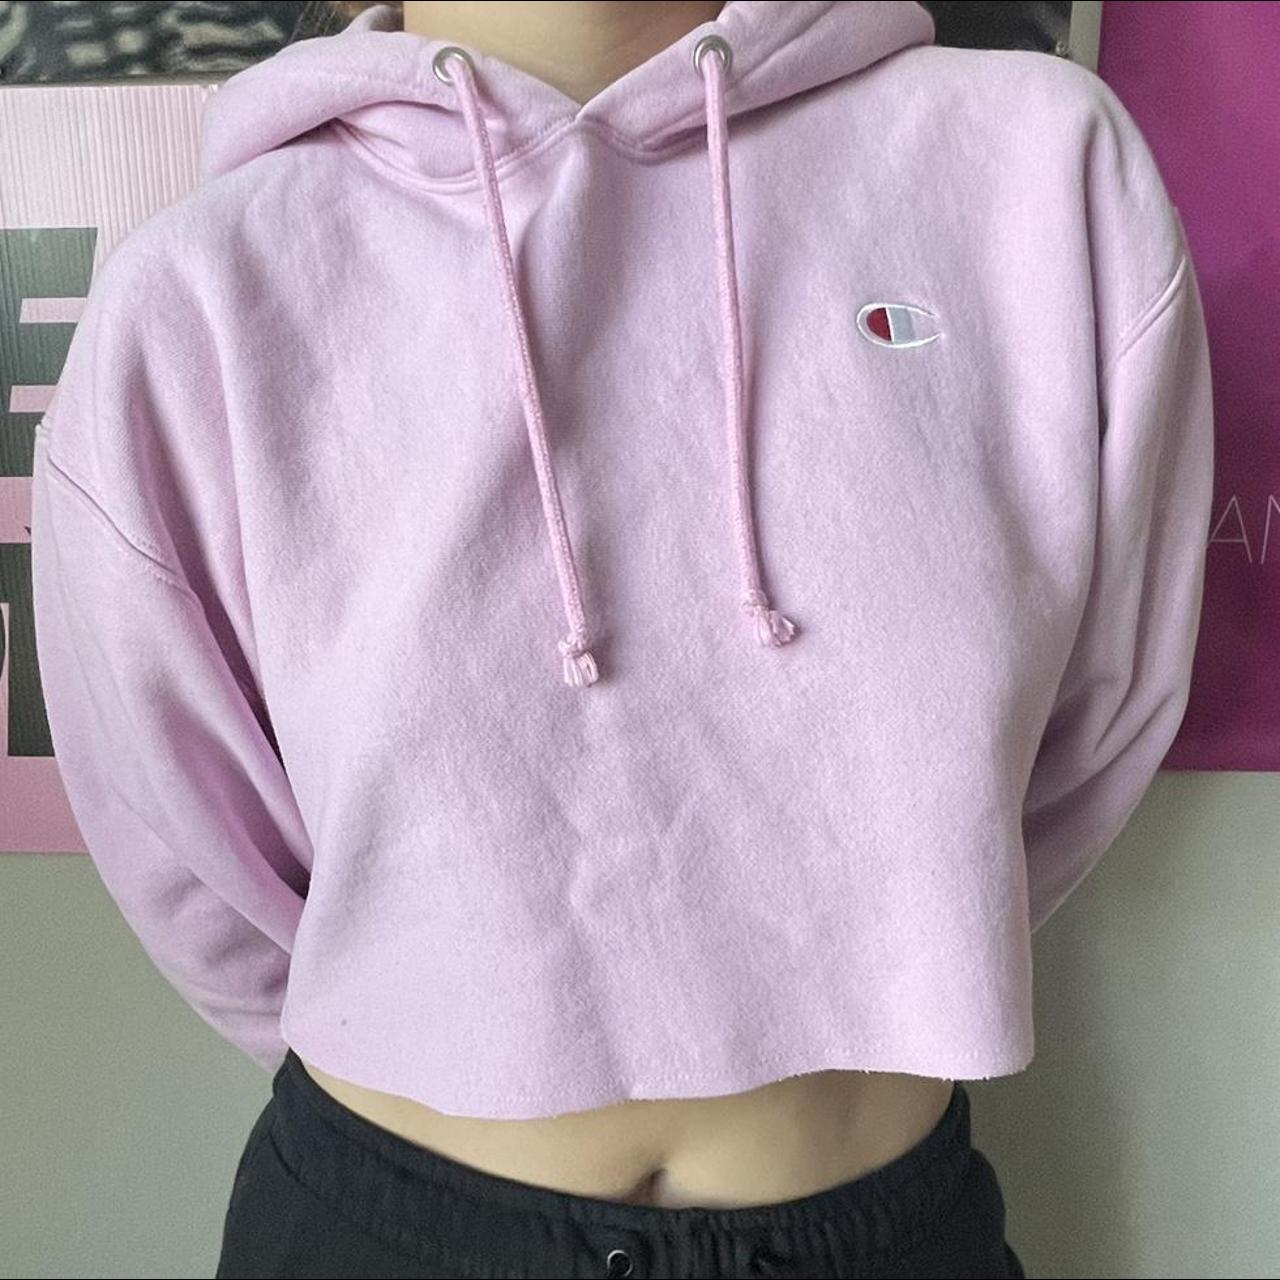 Purple and pink Champion cropped hoodie. The